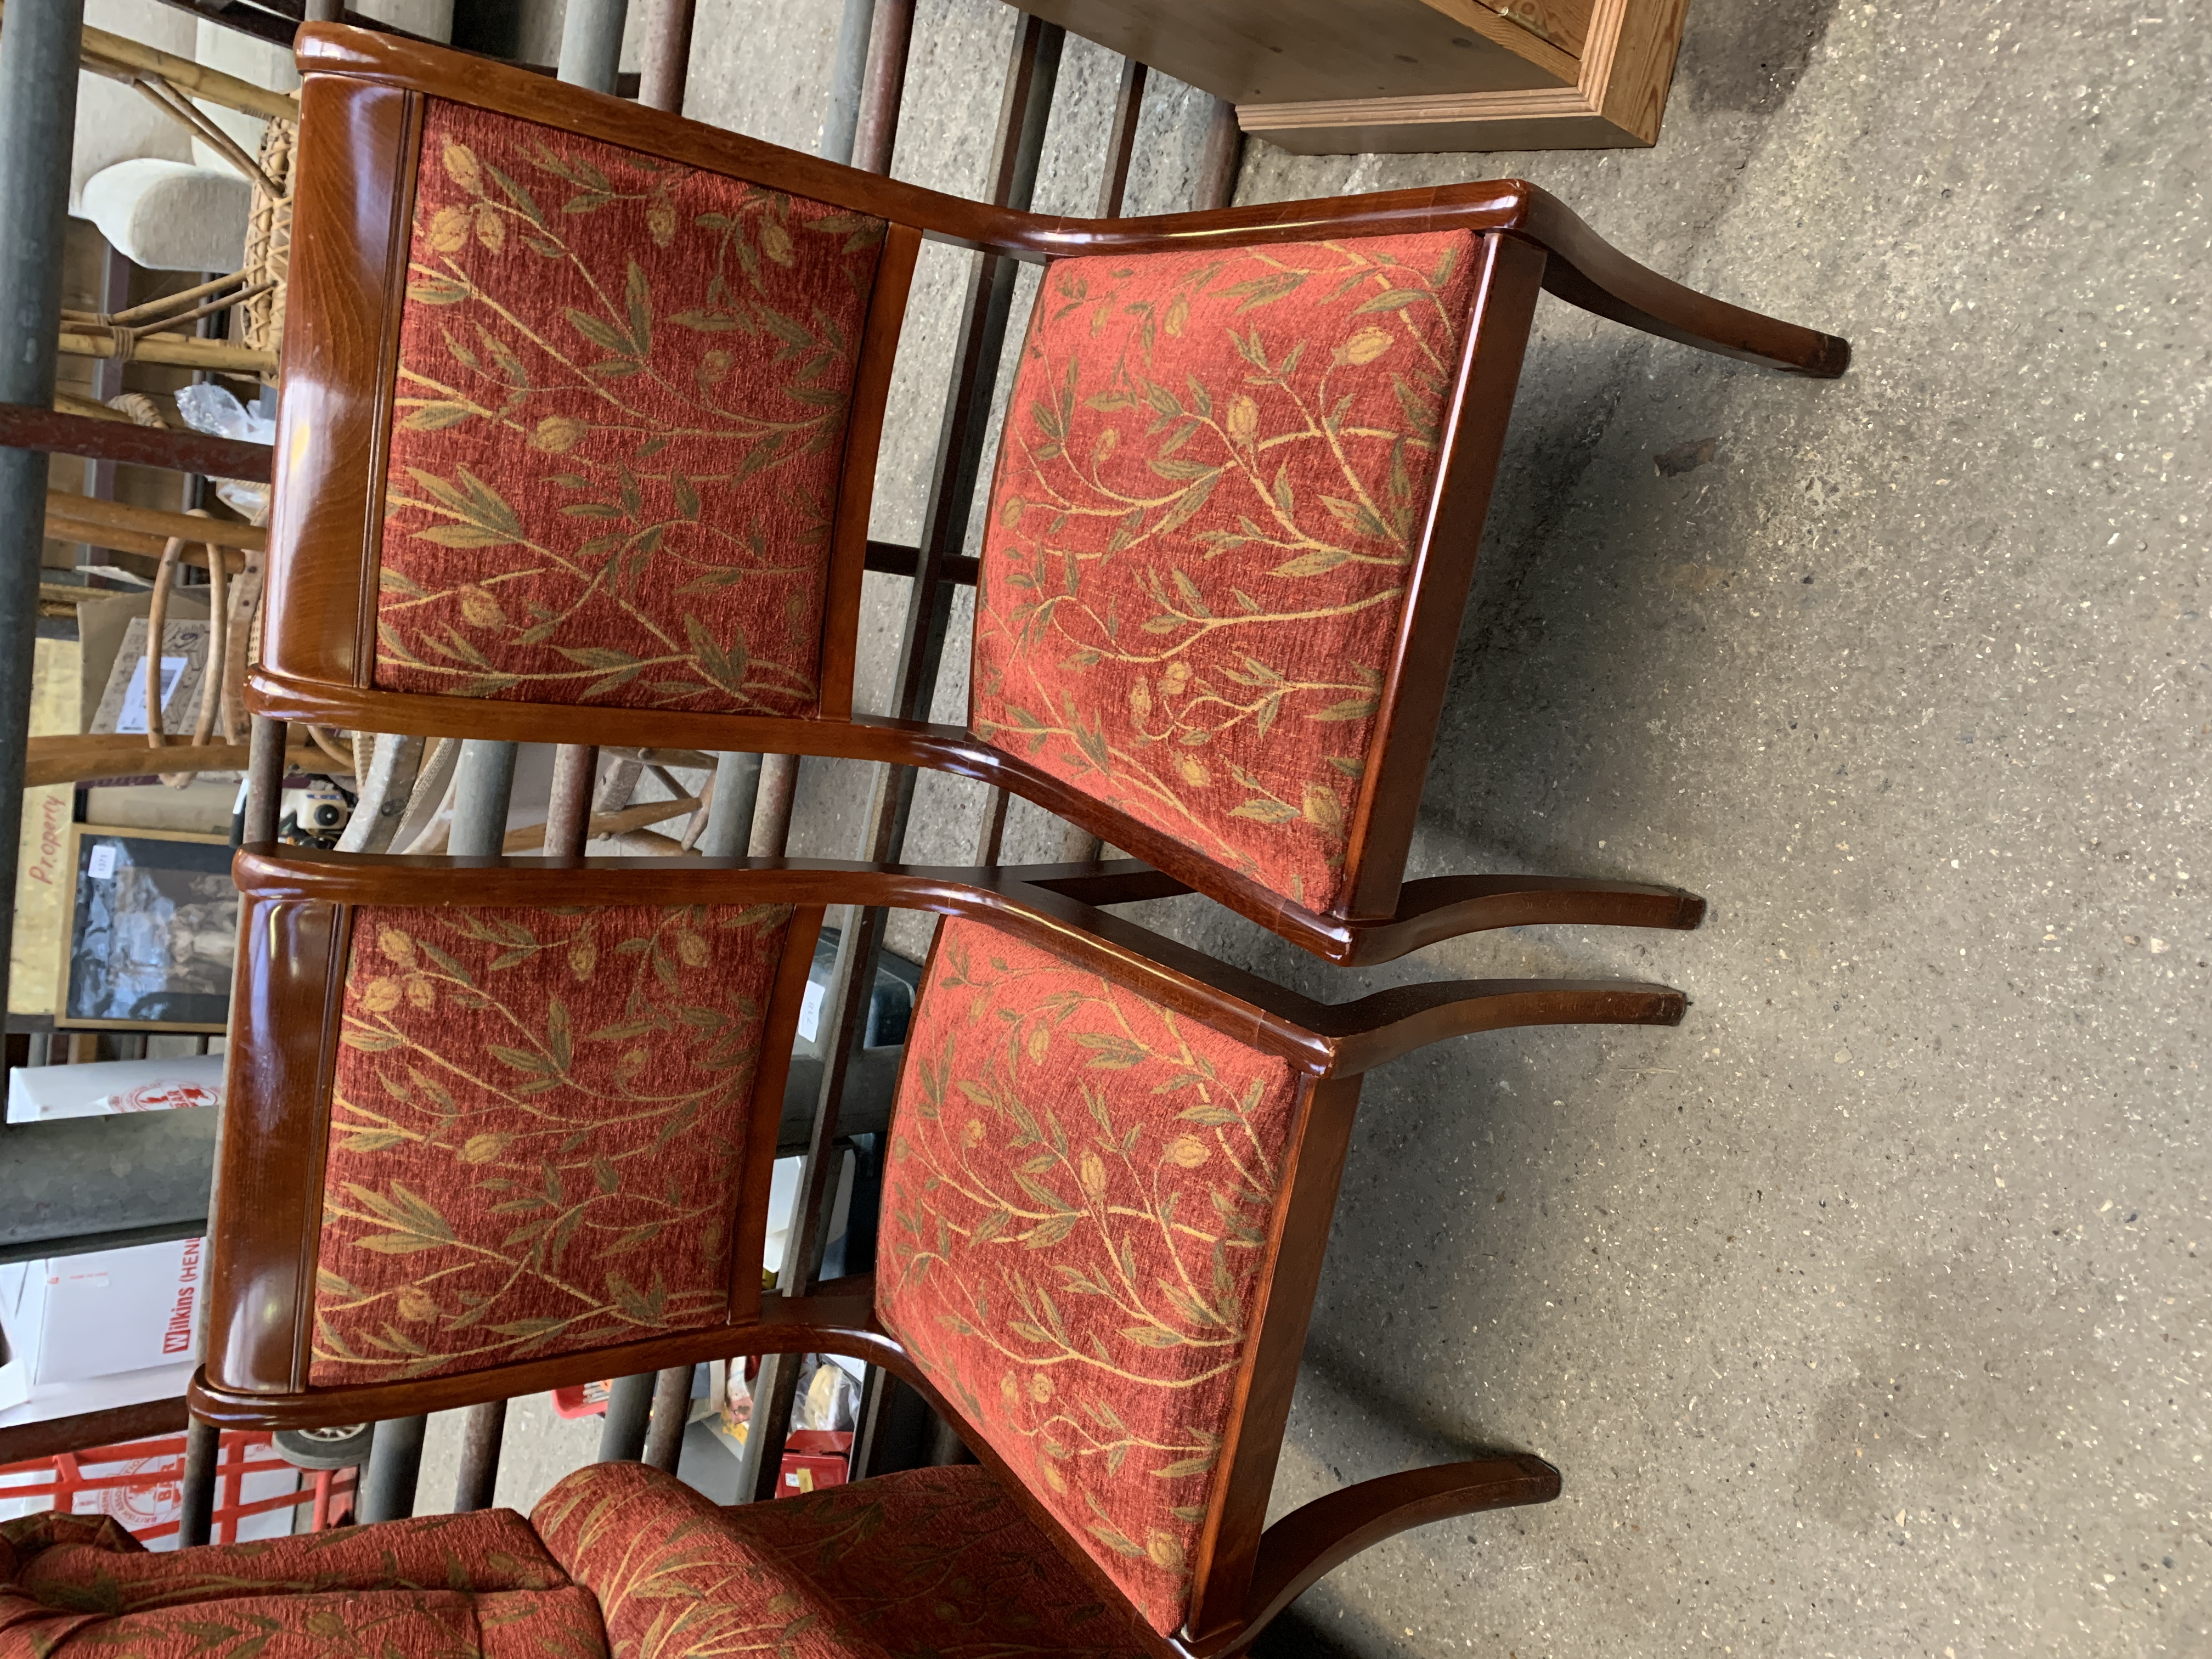 Pair of dining chairs with sabre legs upholstered in dark red and gold floral design.